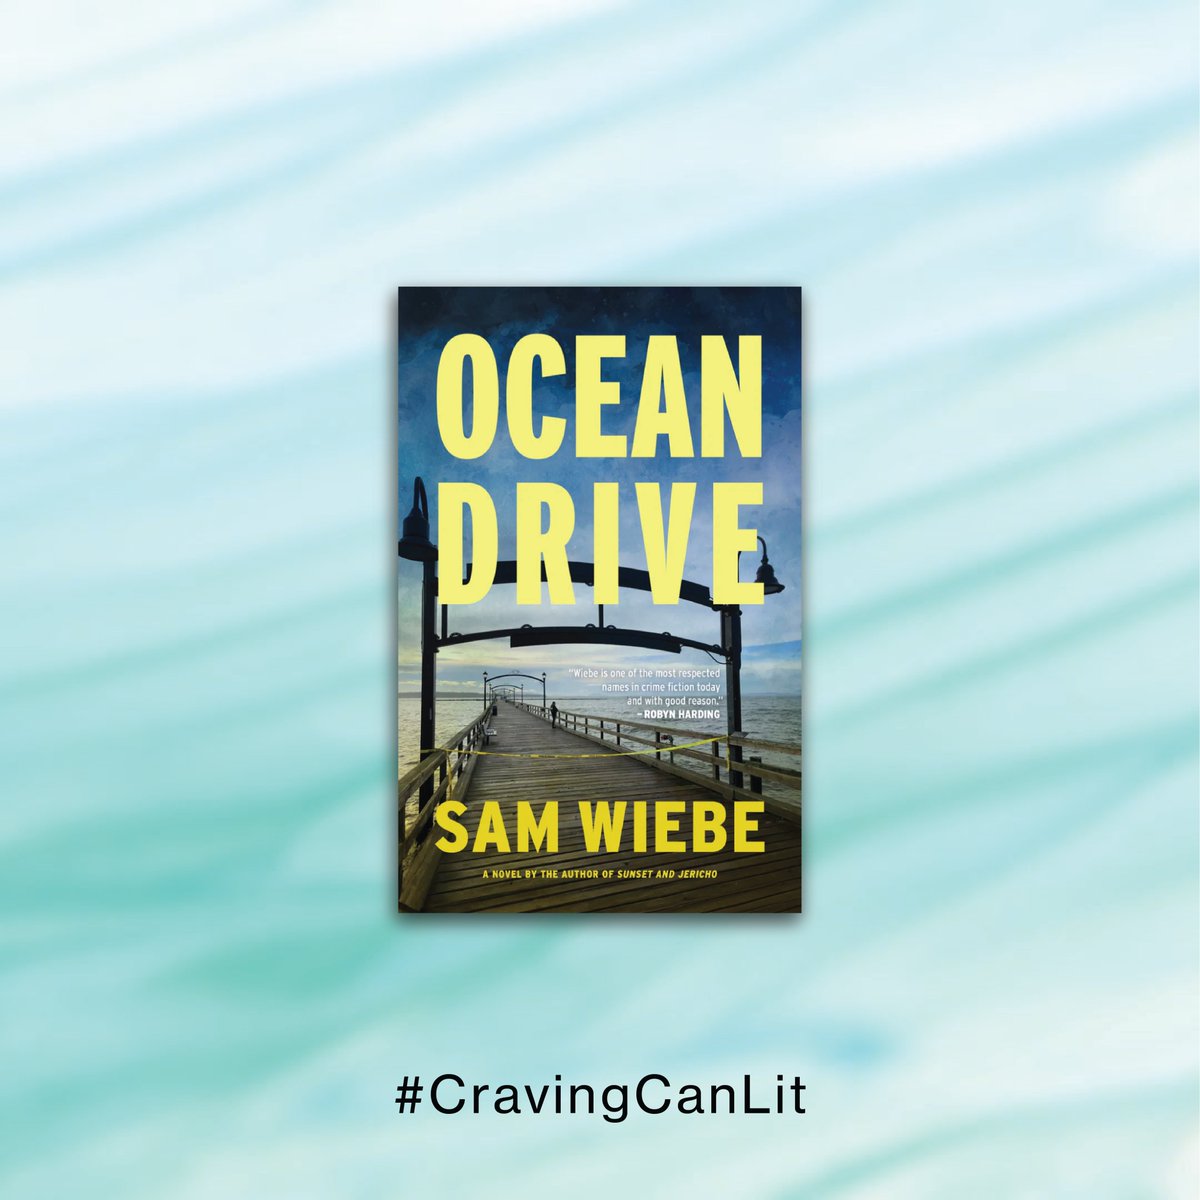 Congratulations to @sam_wiebe on the release of Ocean Drive, published by @Harbour_Publish! #CravingCanLit